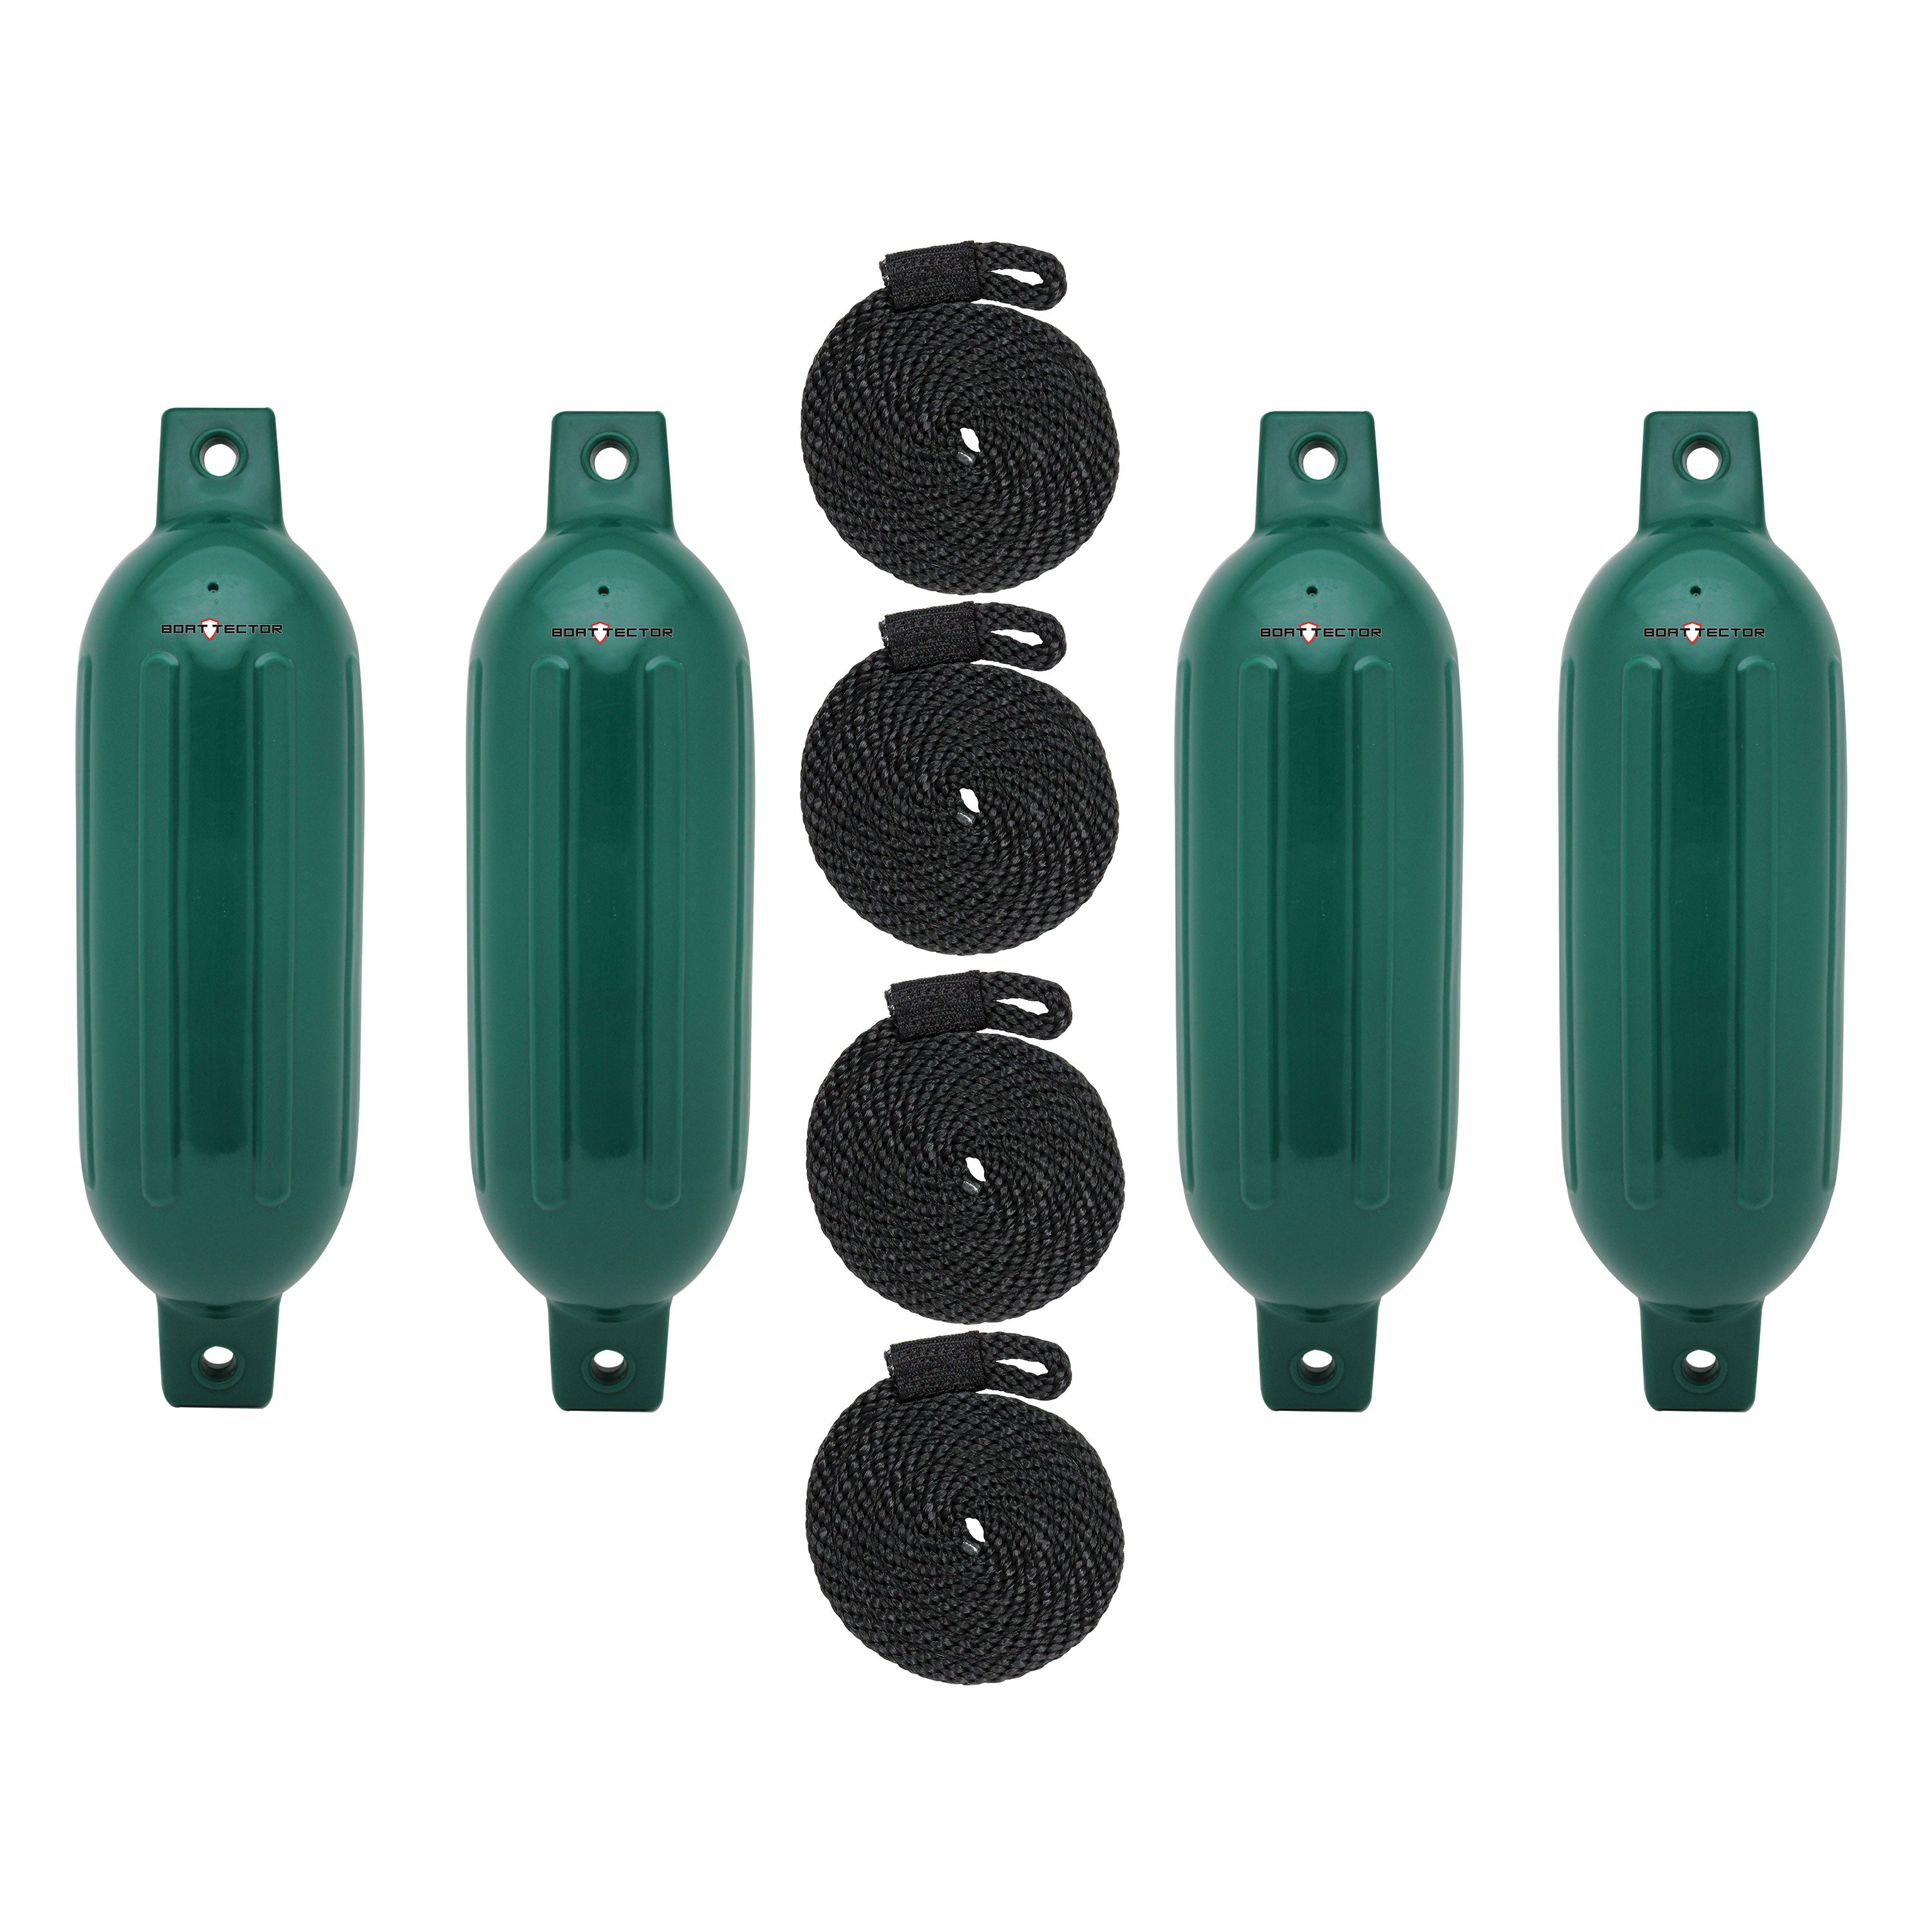 Extreme Max 3006.7536 BoatTector Inflatable Fender Value 4-Pack - 4.5" x 16", Forest Green